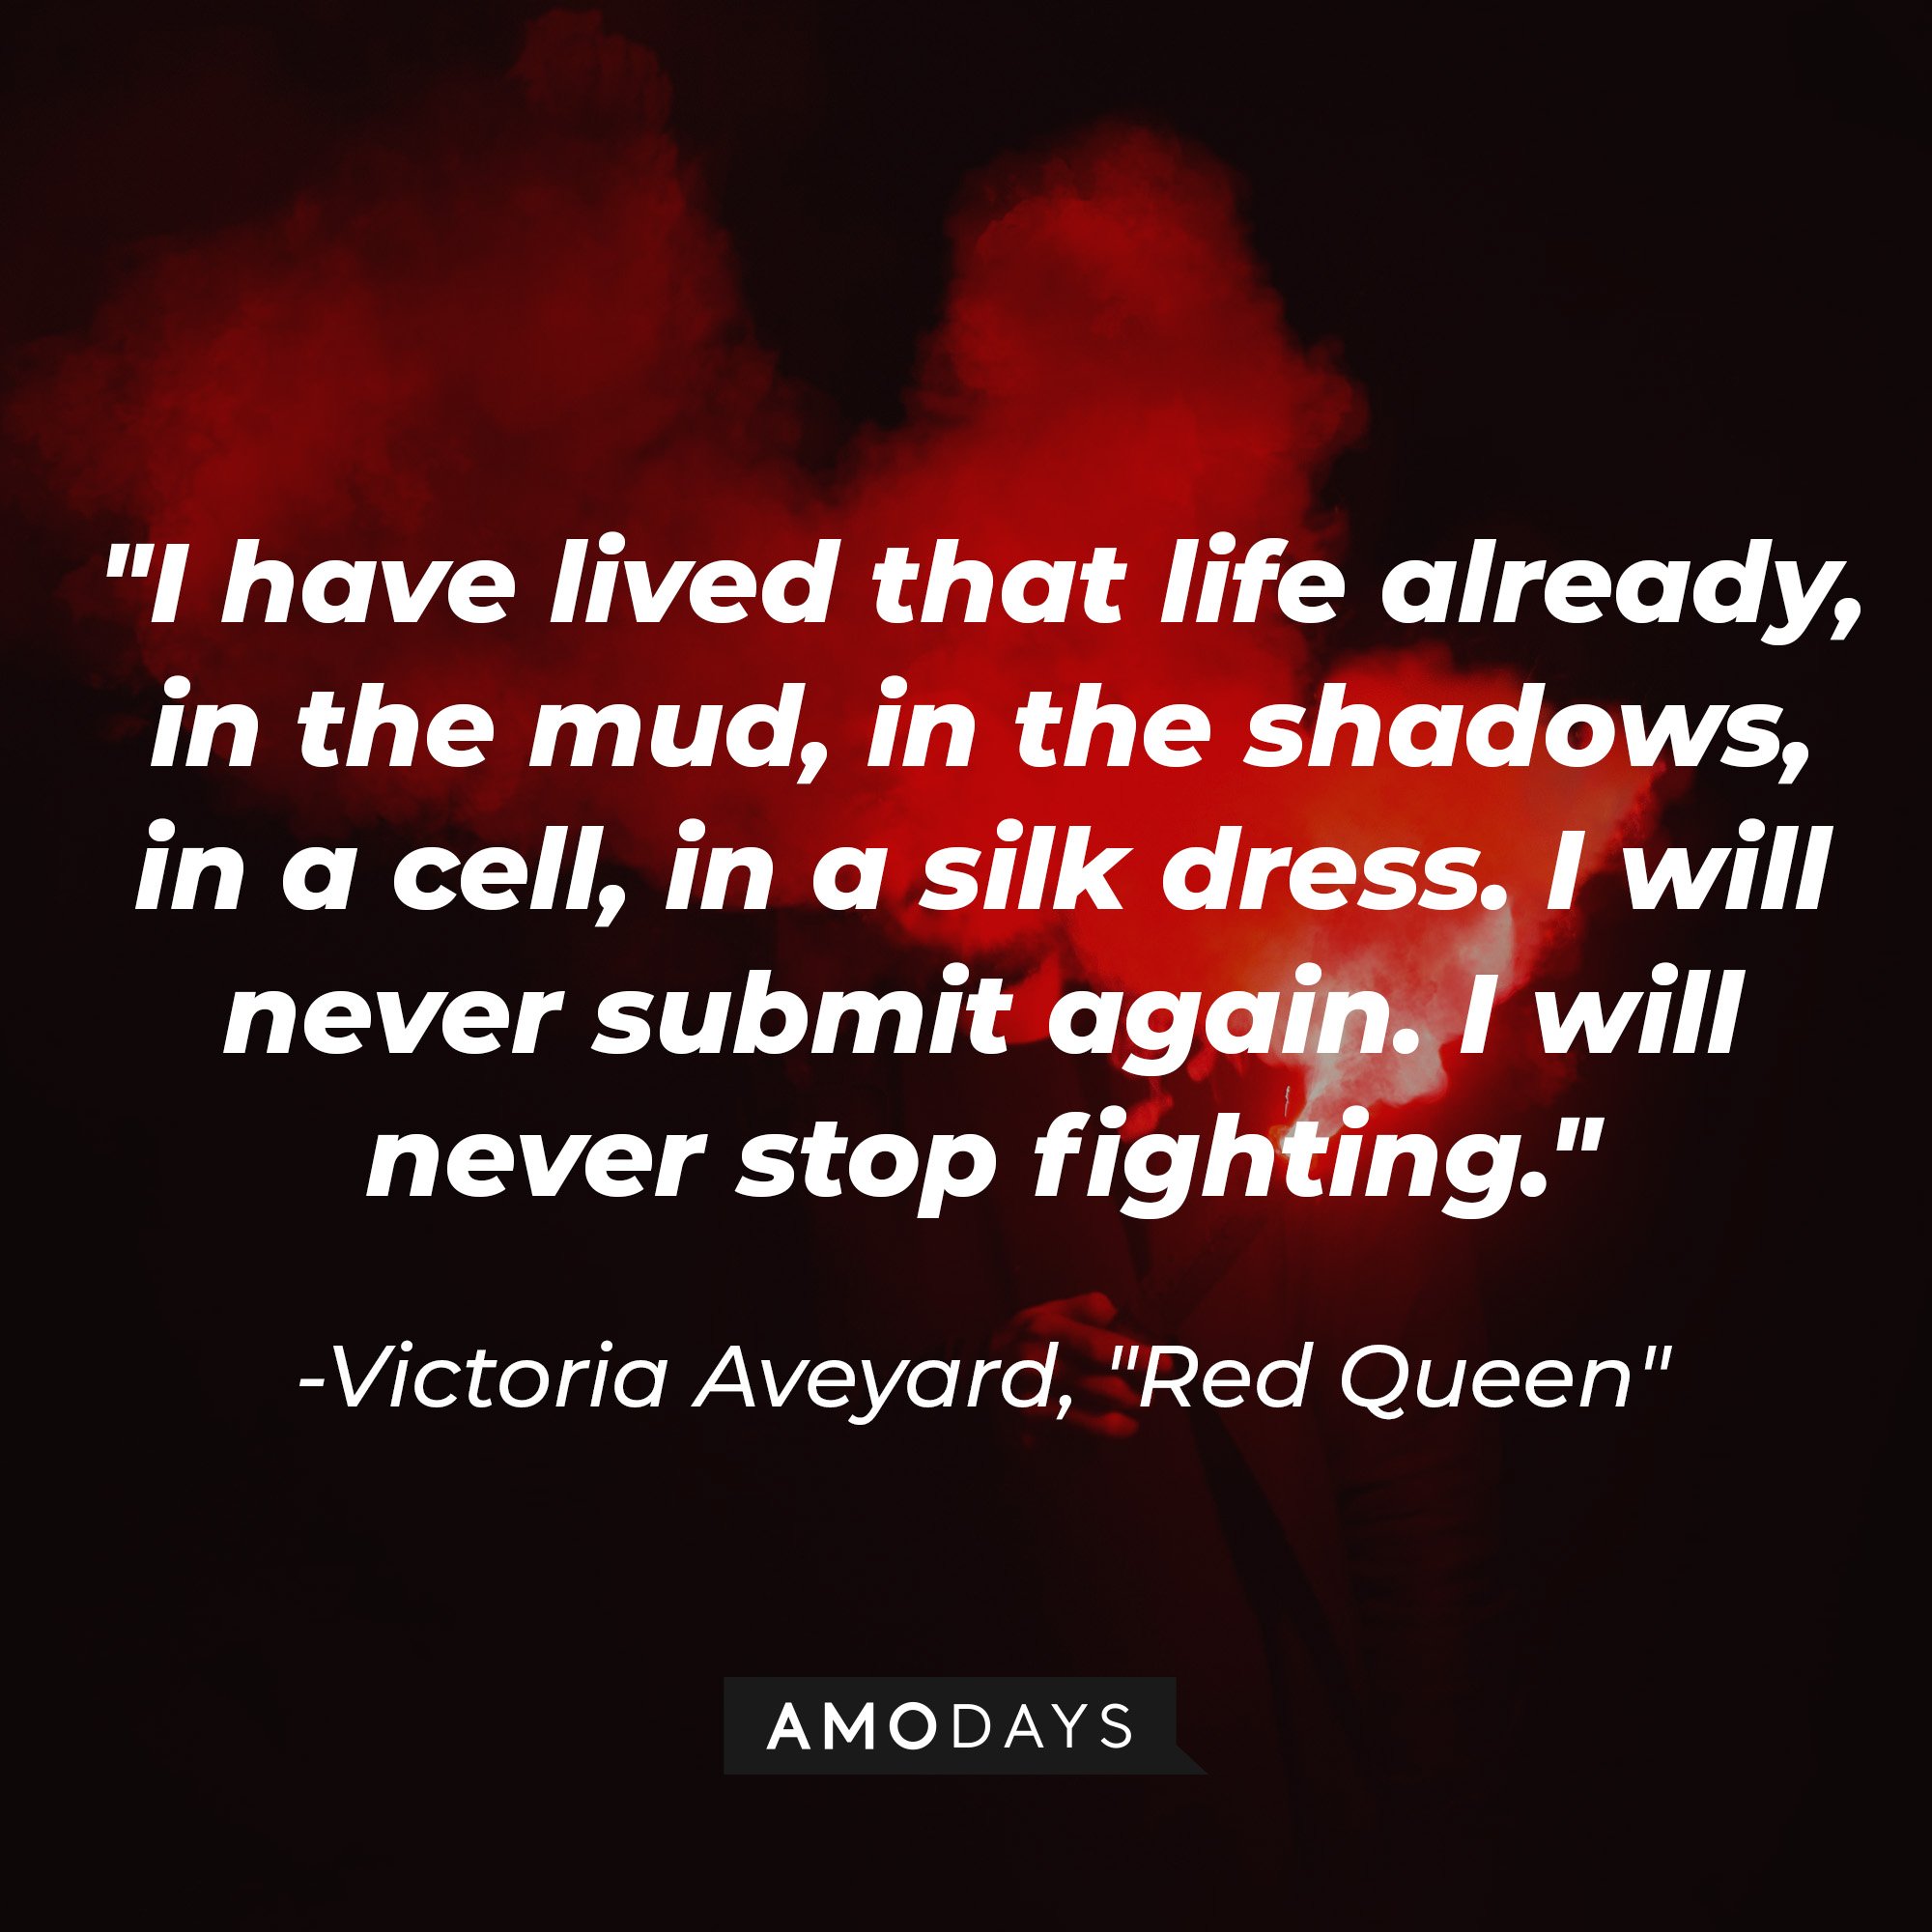 Victoria Aveyard’s quote in “Red Queen”: "With my newly pale skin and darkened eyes and lips, I look cold, cruel, a living razor. I look silver. I look beautiful. And I hate it." | Image: AmoDays